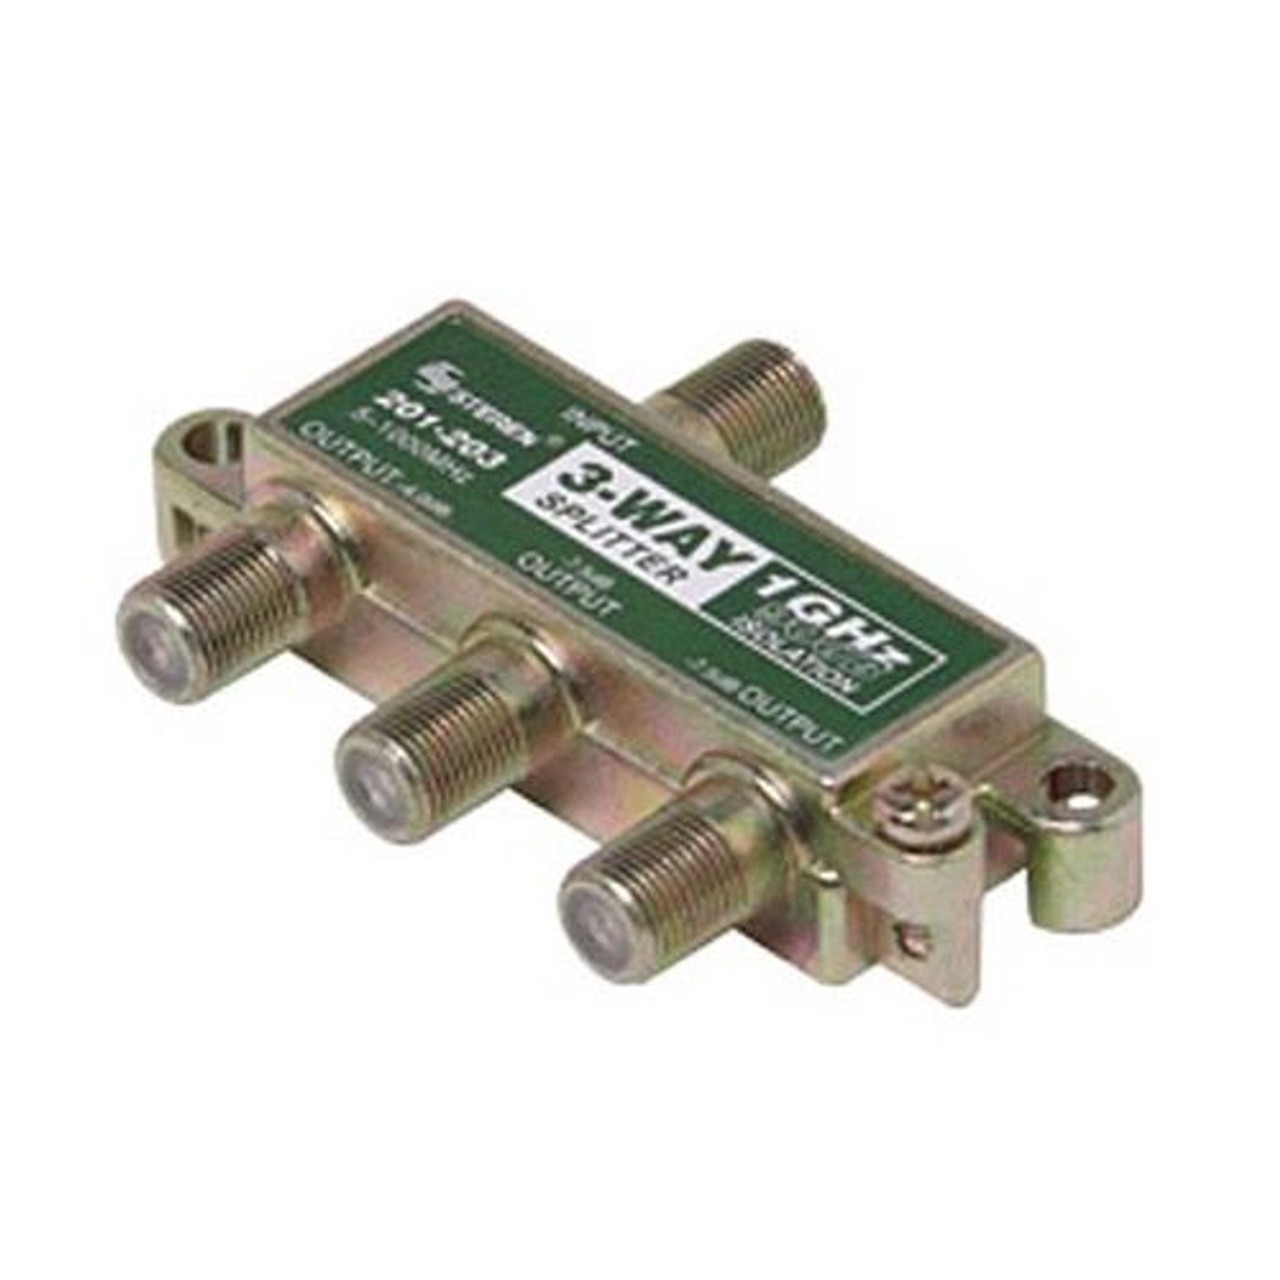 Steren 201-203 3-Way Splitter 1 GHz 90 dB F-Type CATV 75 Ohm 5 - 1000 MHz Balanced Isolation 6.5 dB Max Insertion Loss Port - Port 29 dB Min Isolation Solder Back Cover High Performance Printed Circuit Board, Part # 201203